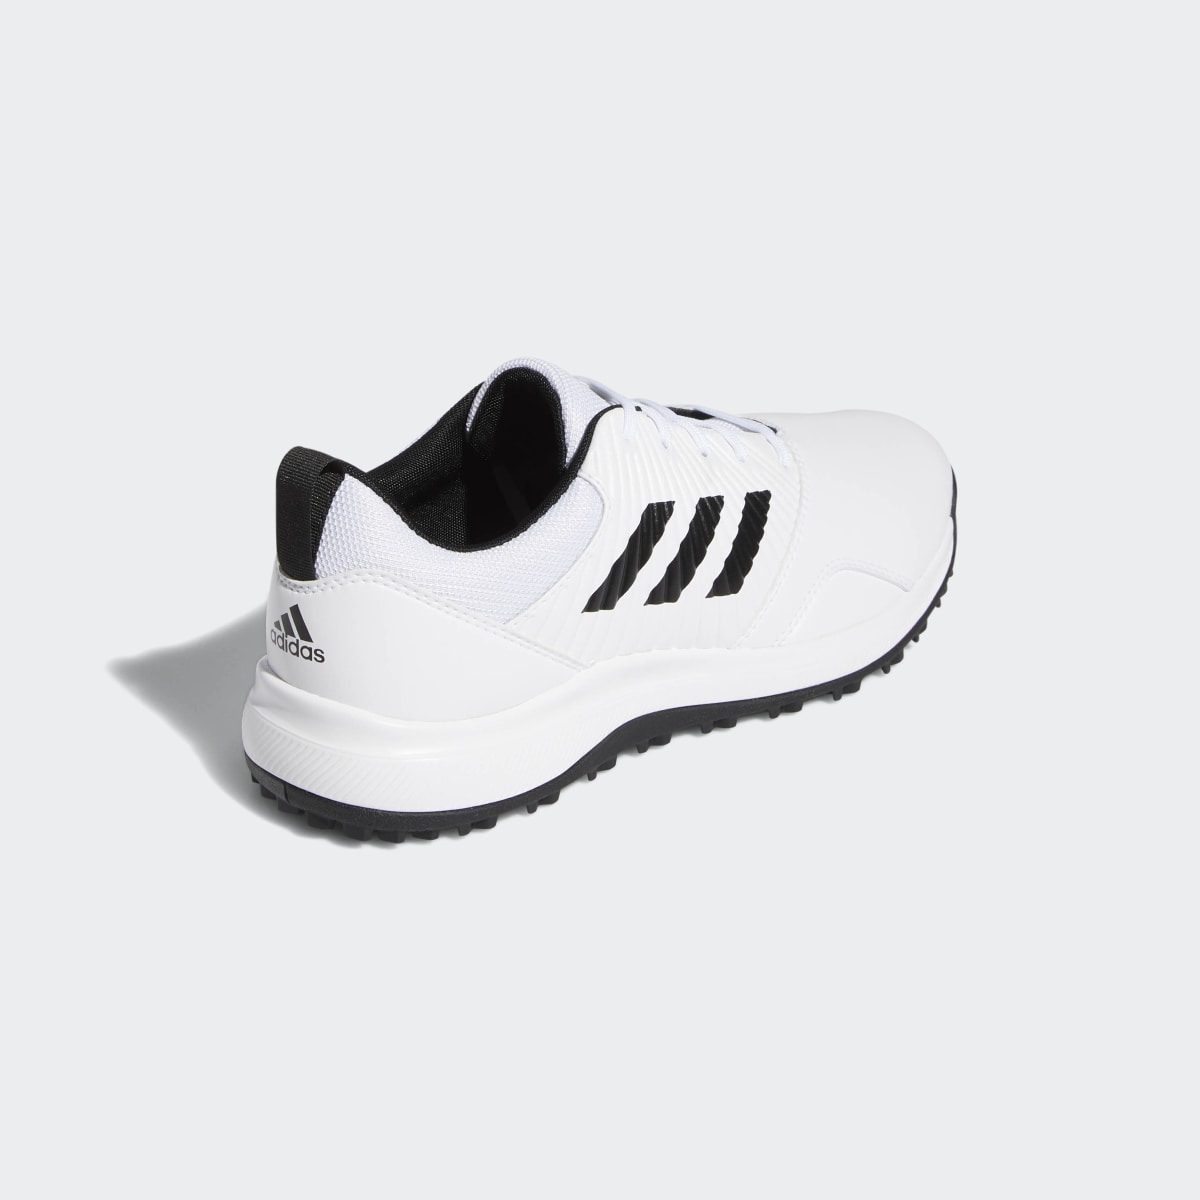 Adidas CP Traxion Spikeless Golf Shoes. 7